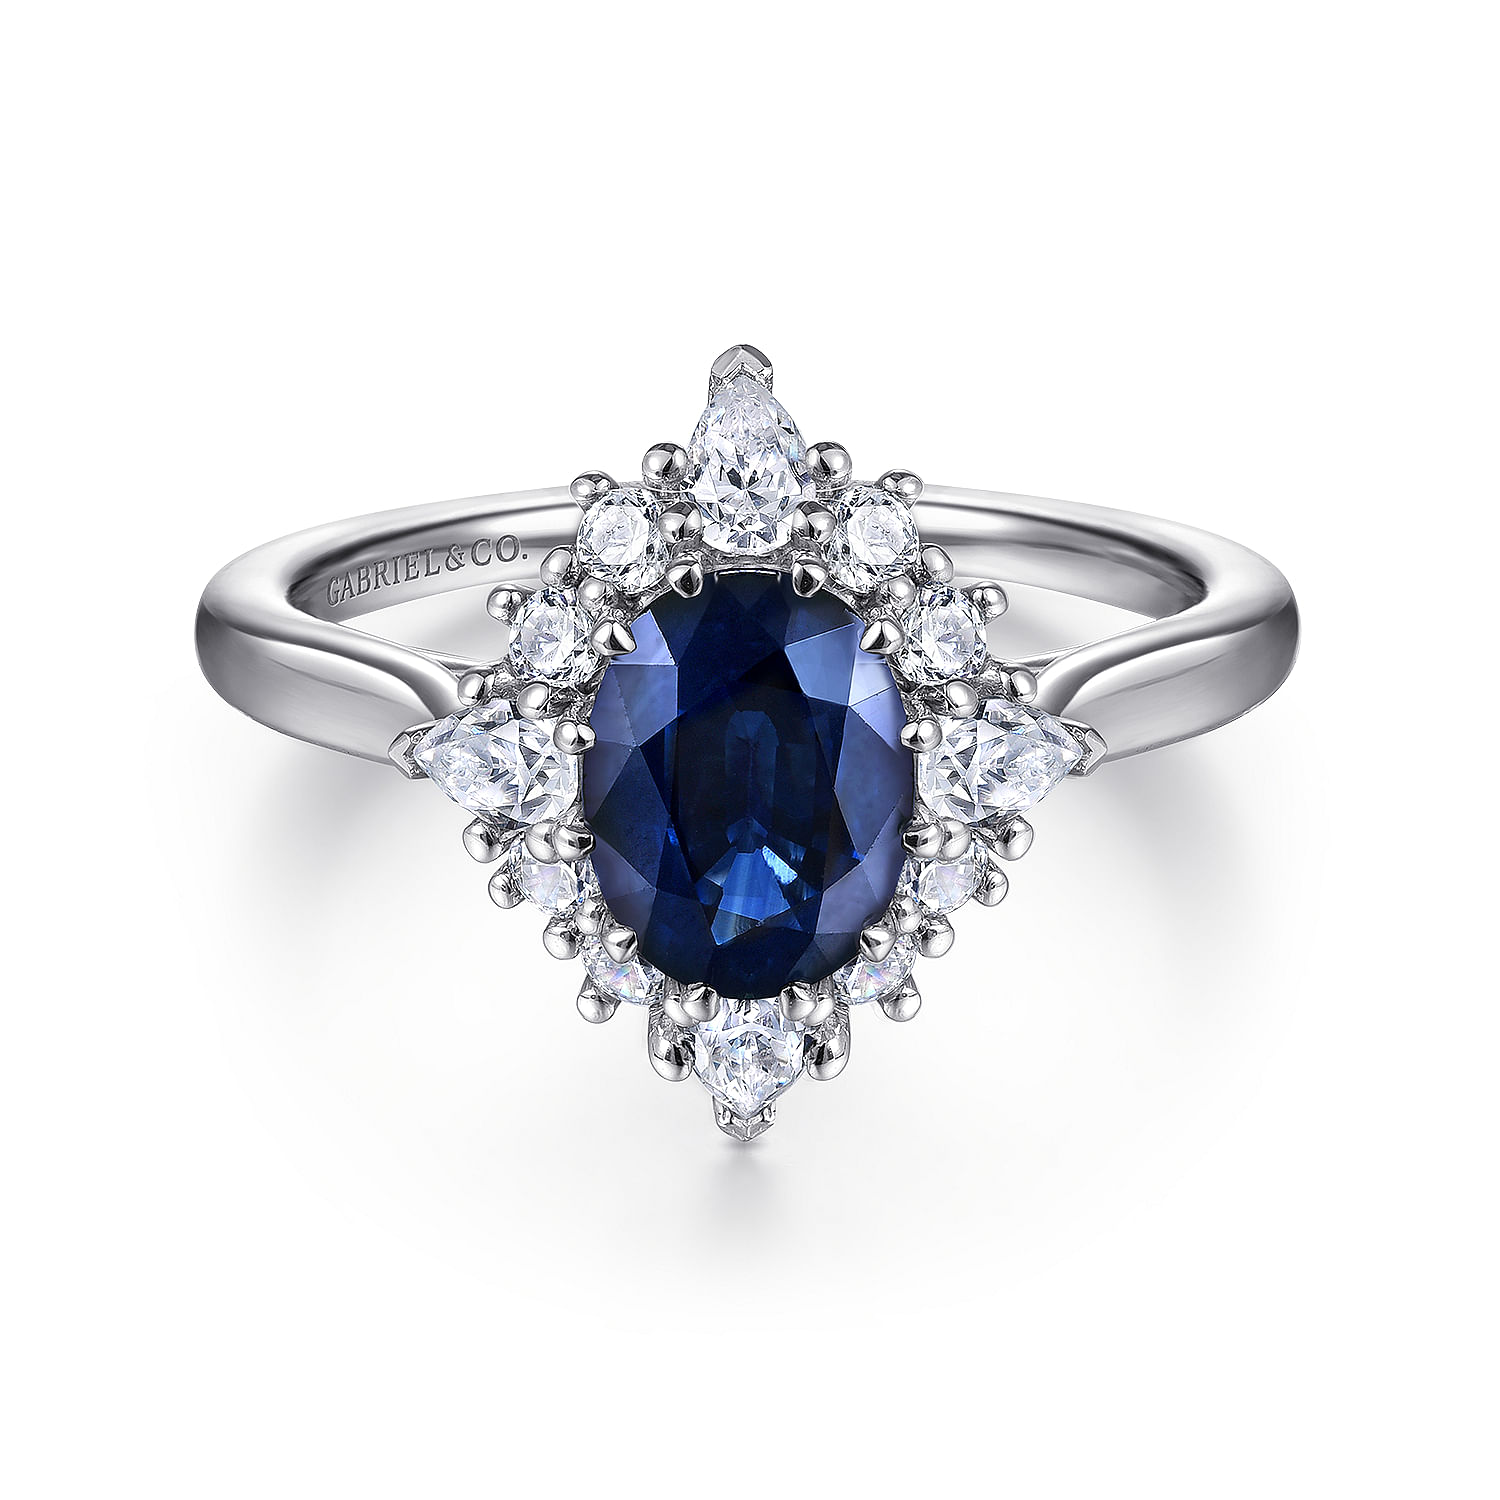 Gabriel - 14K White Gold Oval Halo Sapphire and Diamond Engagement Ring